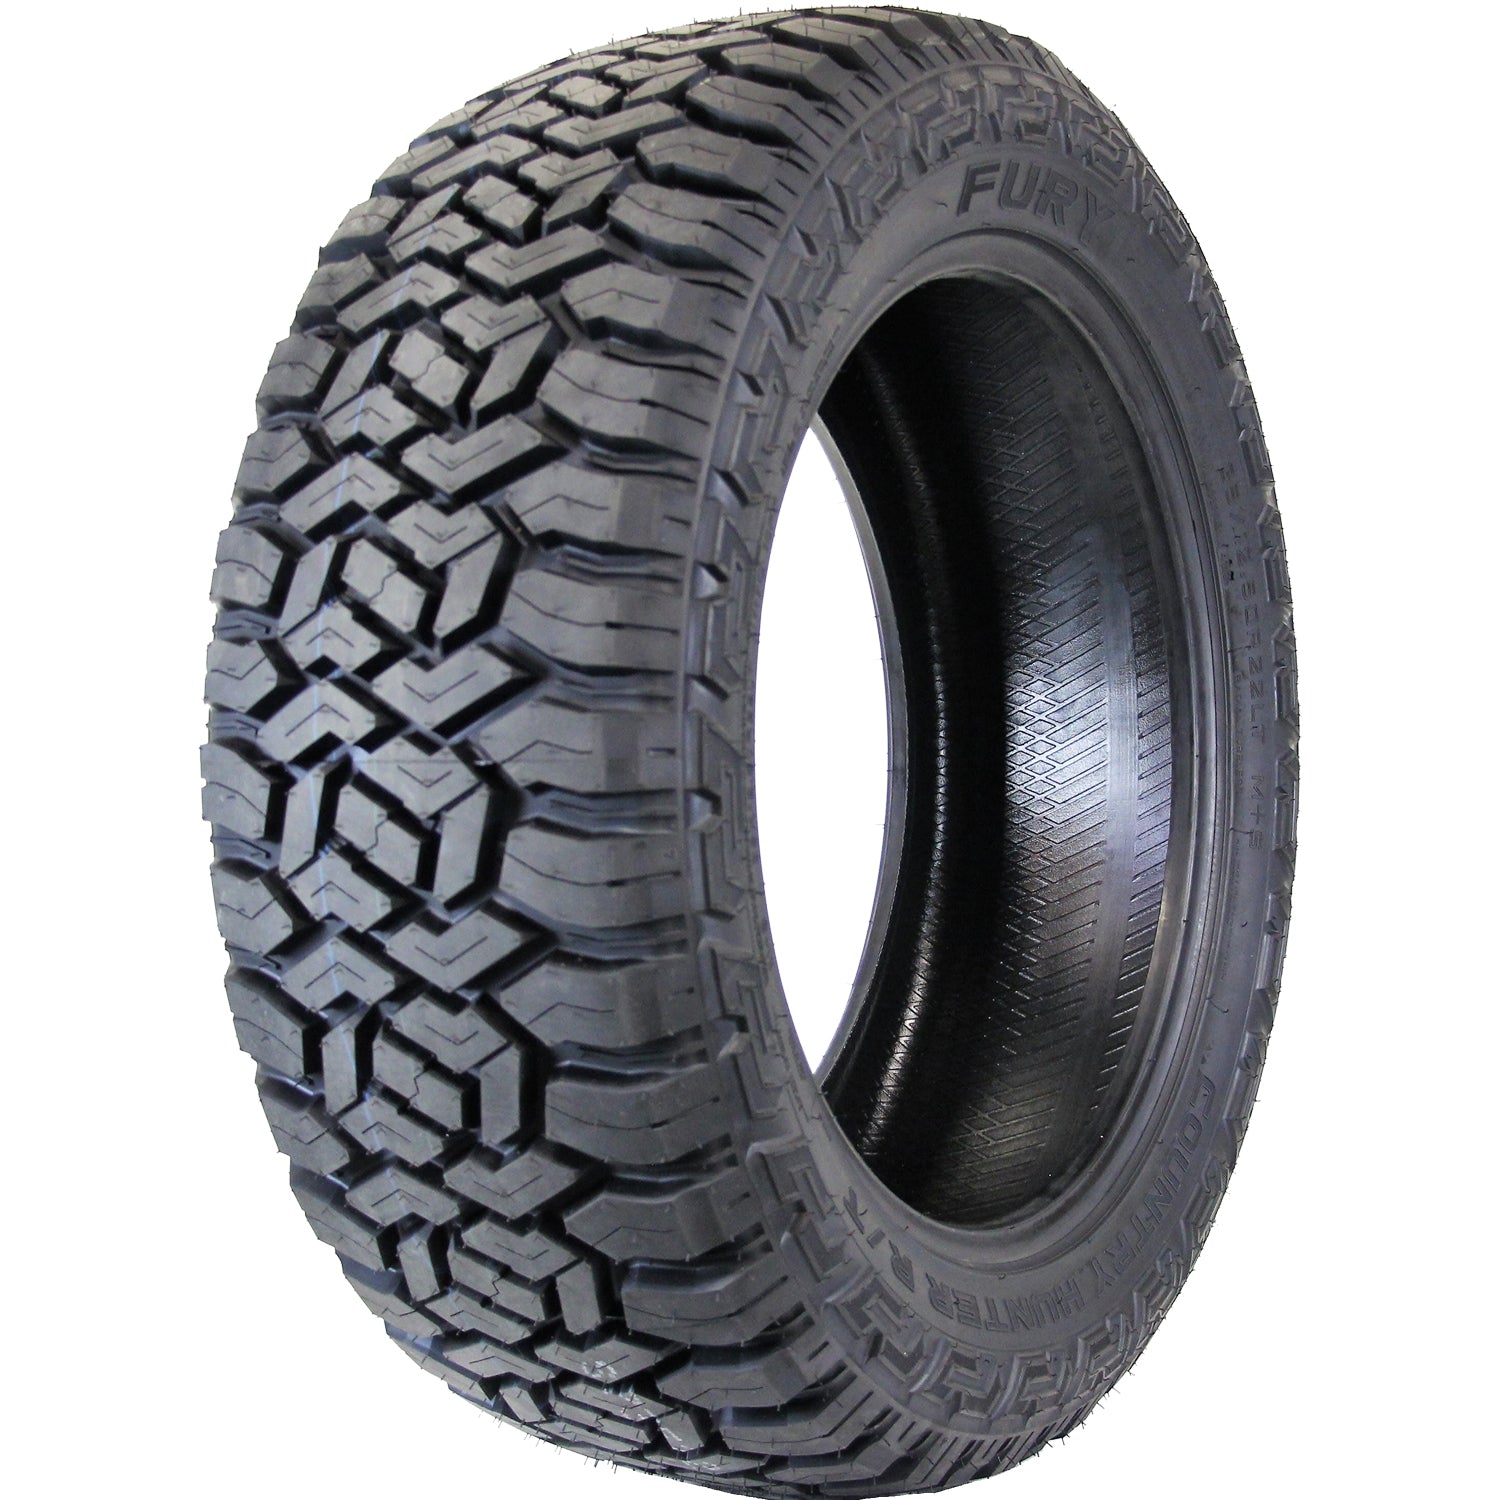 FURY OFFROAD COUNTRY HUNTER RT 37X13.50R20LT Tires